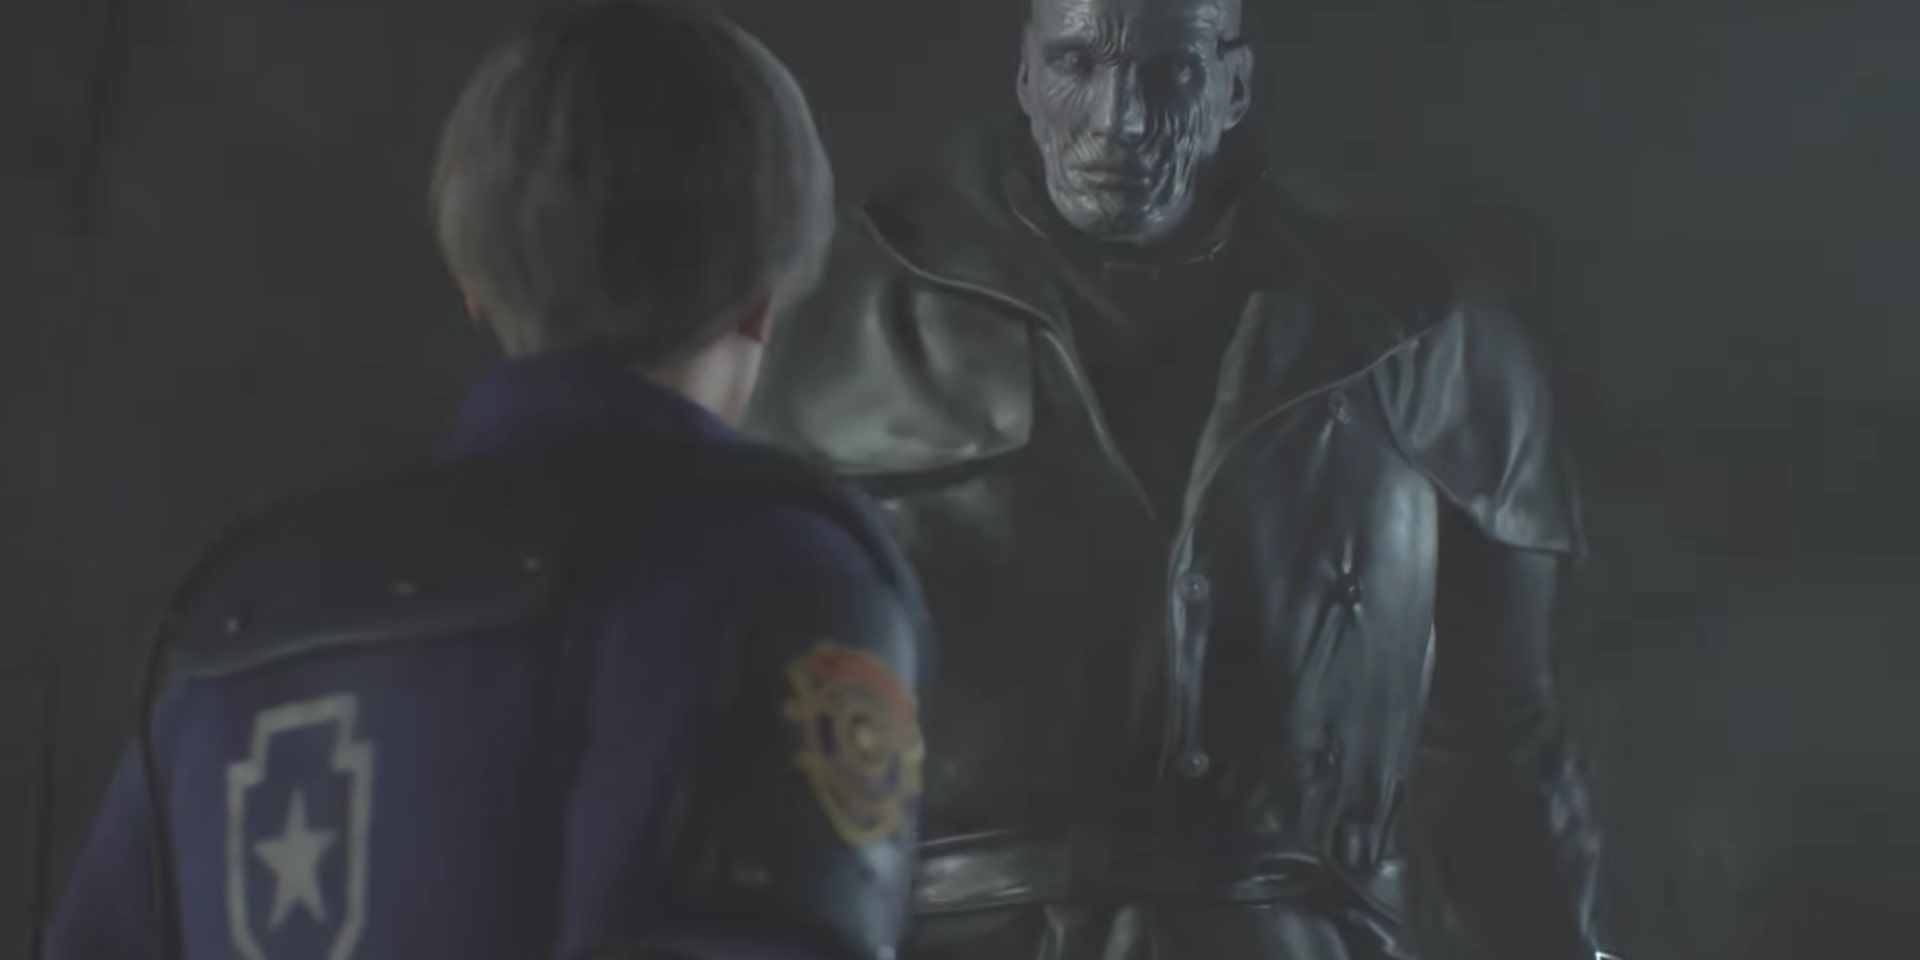 Leon staring up at a fiercely tall Mr. X without his hat in the garage, before Ada runs him over with a large vehicle.